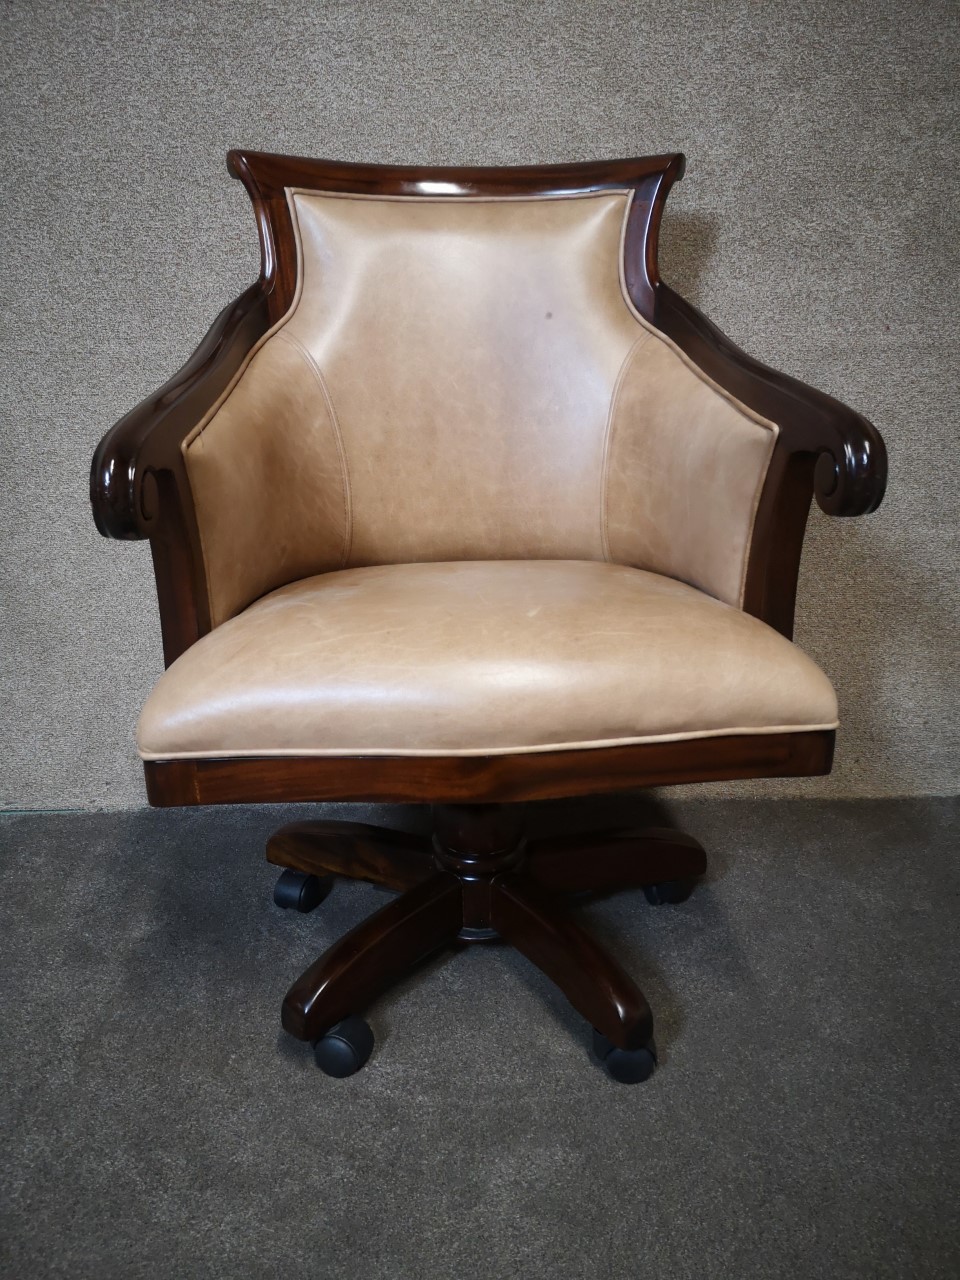 Quality leather office chair画像